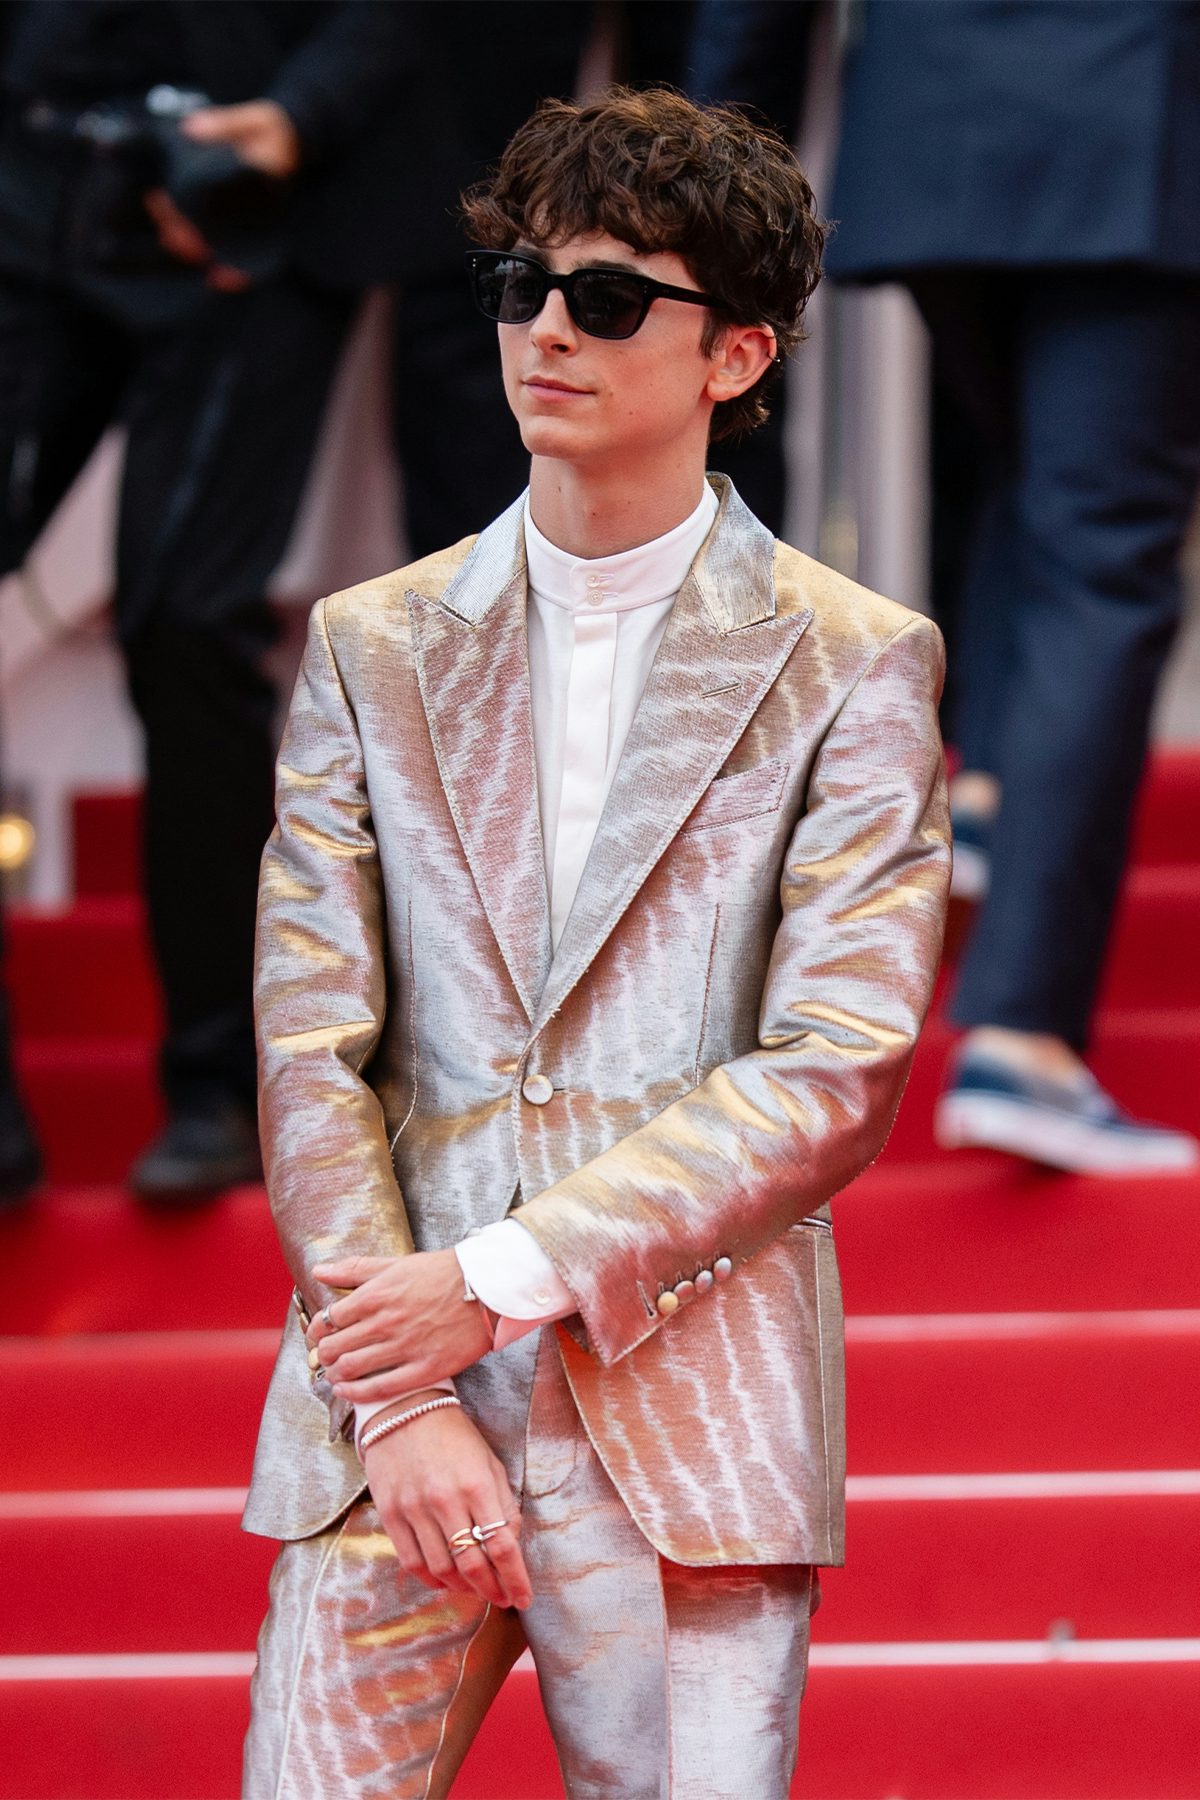 Actor Timothee Chalamet was frequently dripping in Cartier jewels during his appearances at the 2021 Cannes Film Festival. Getty.